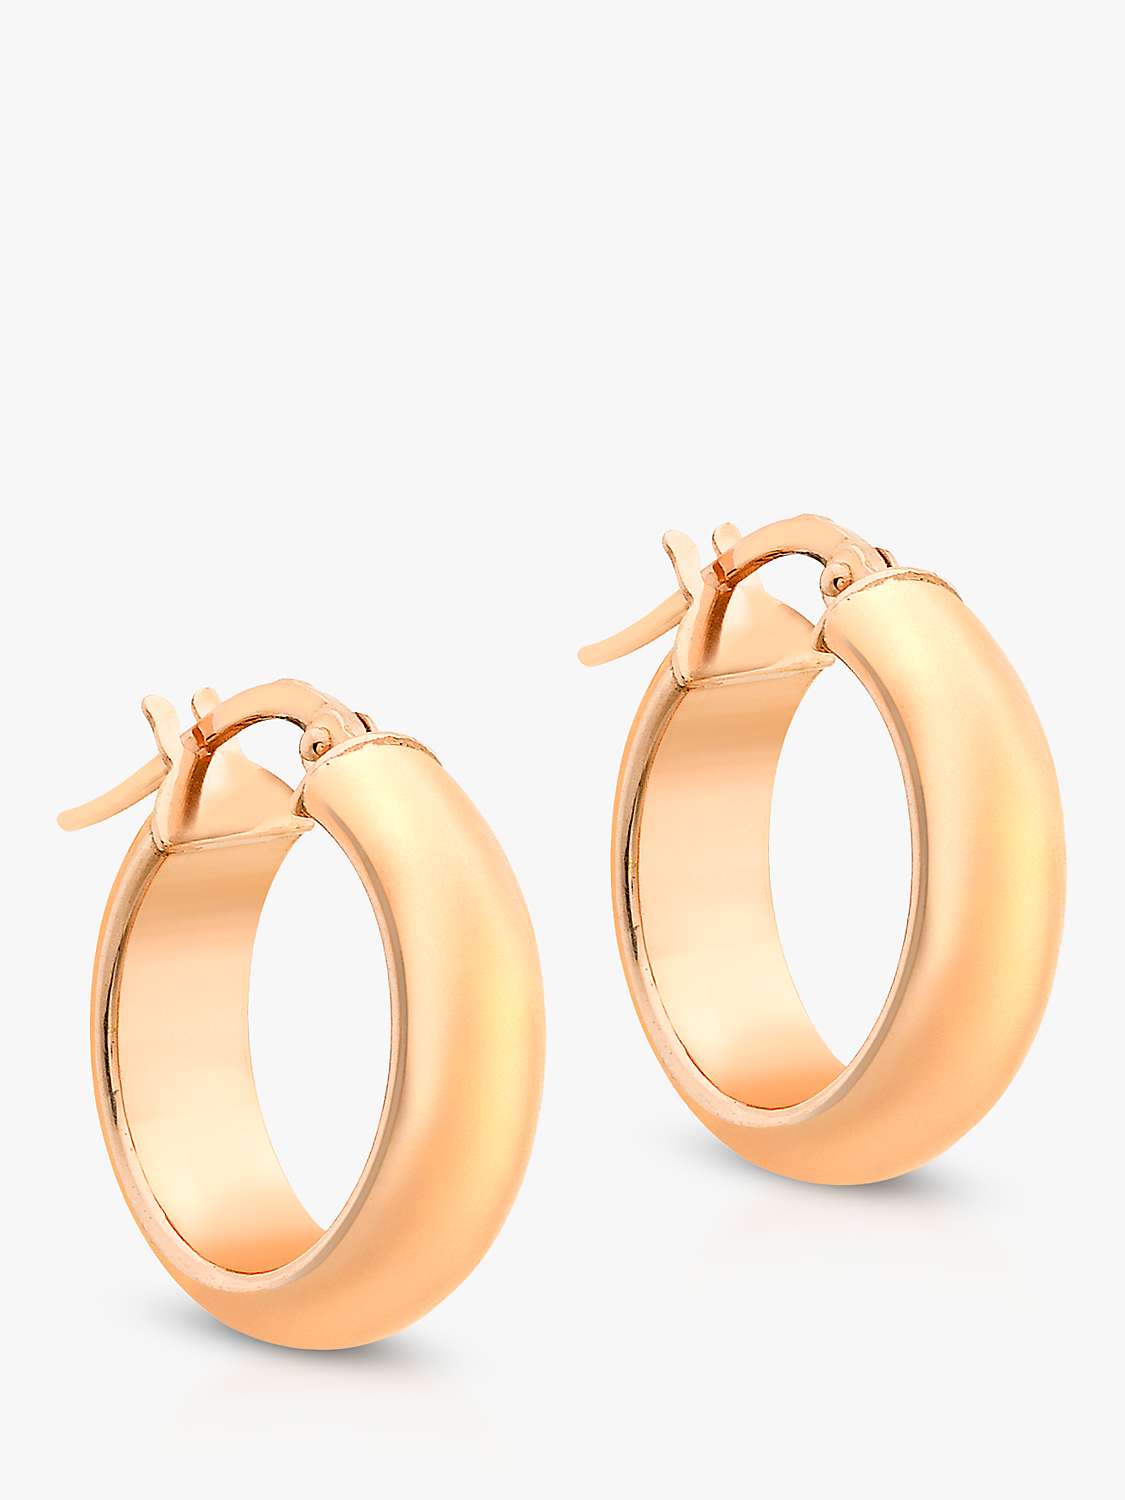 Buy IBB 9ct Gold Polished Creole Earrings, Rose Gold Online at johnlewis.com